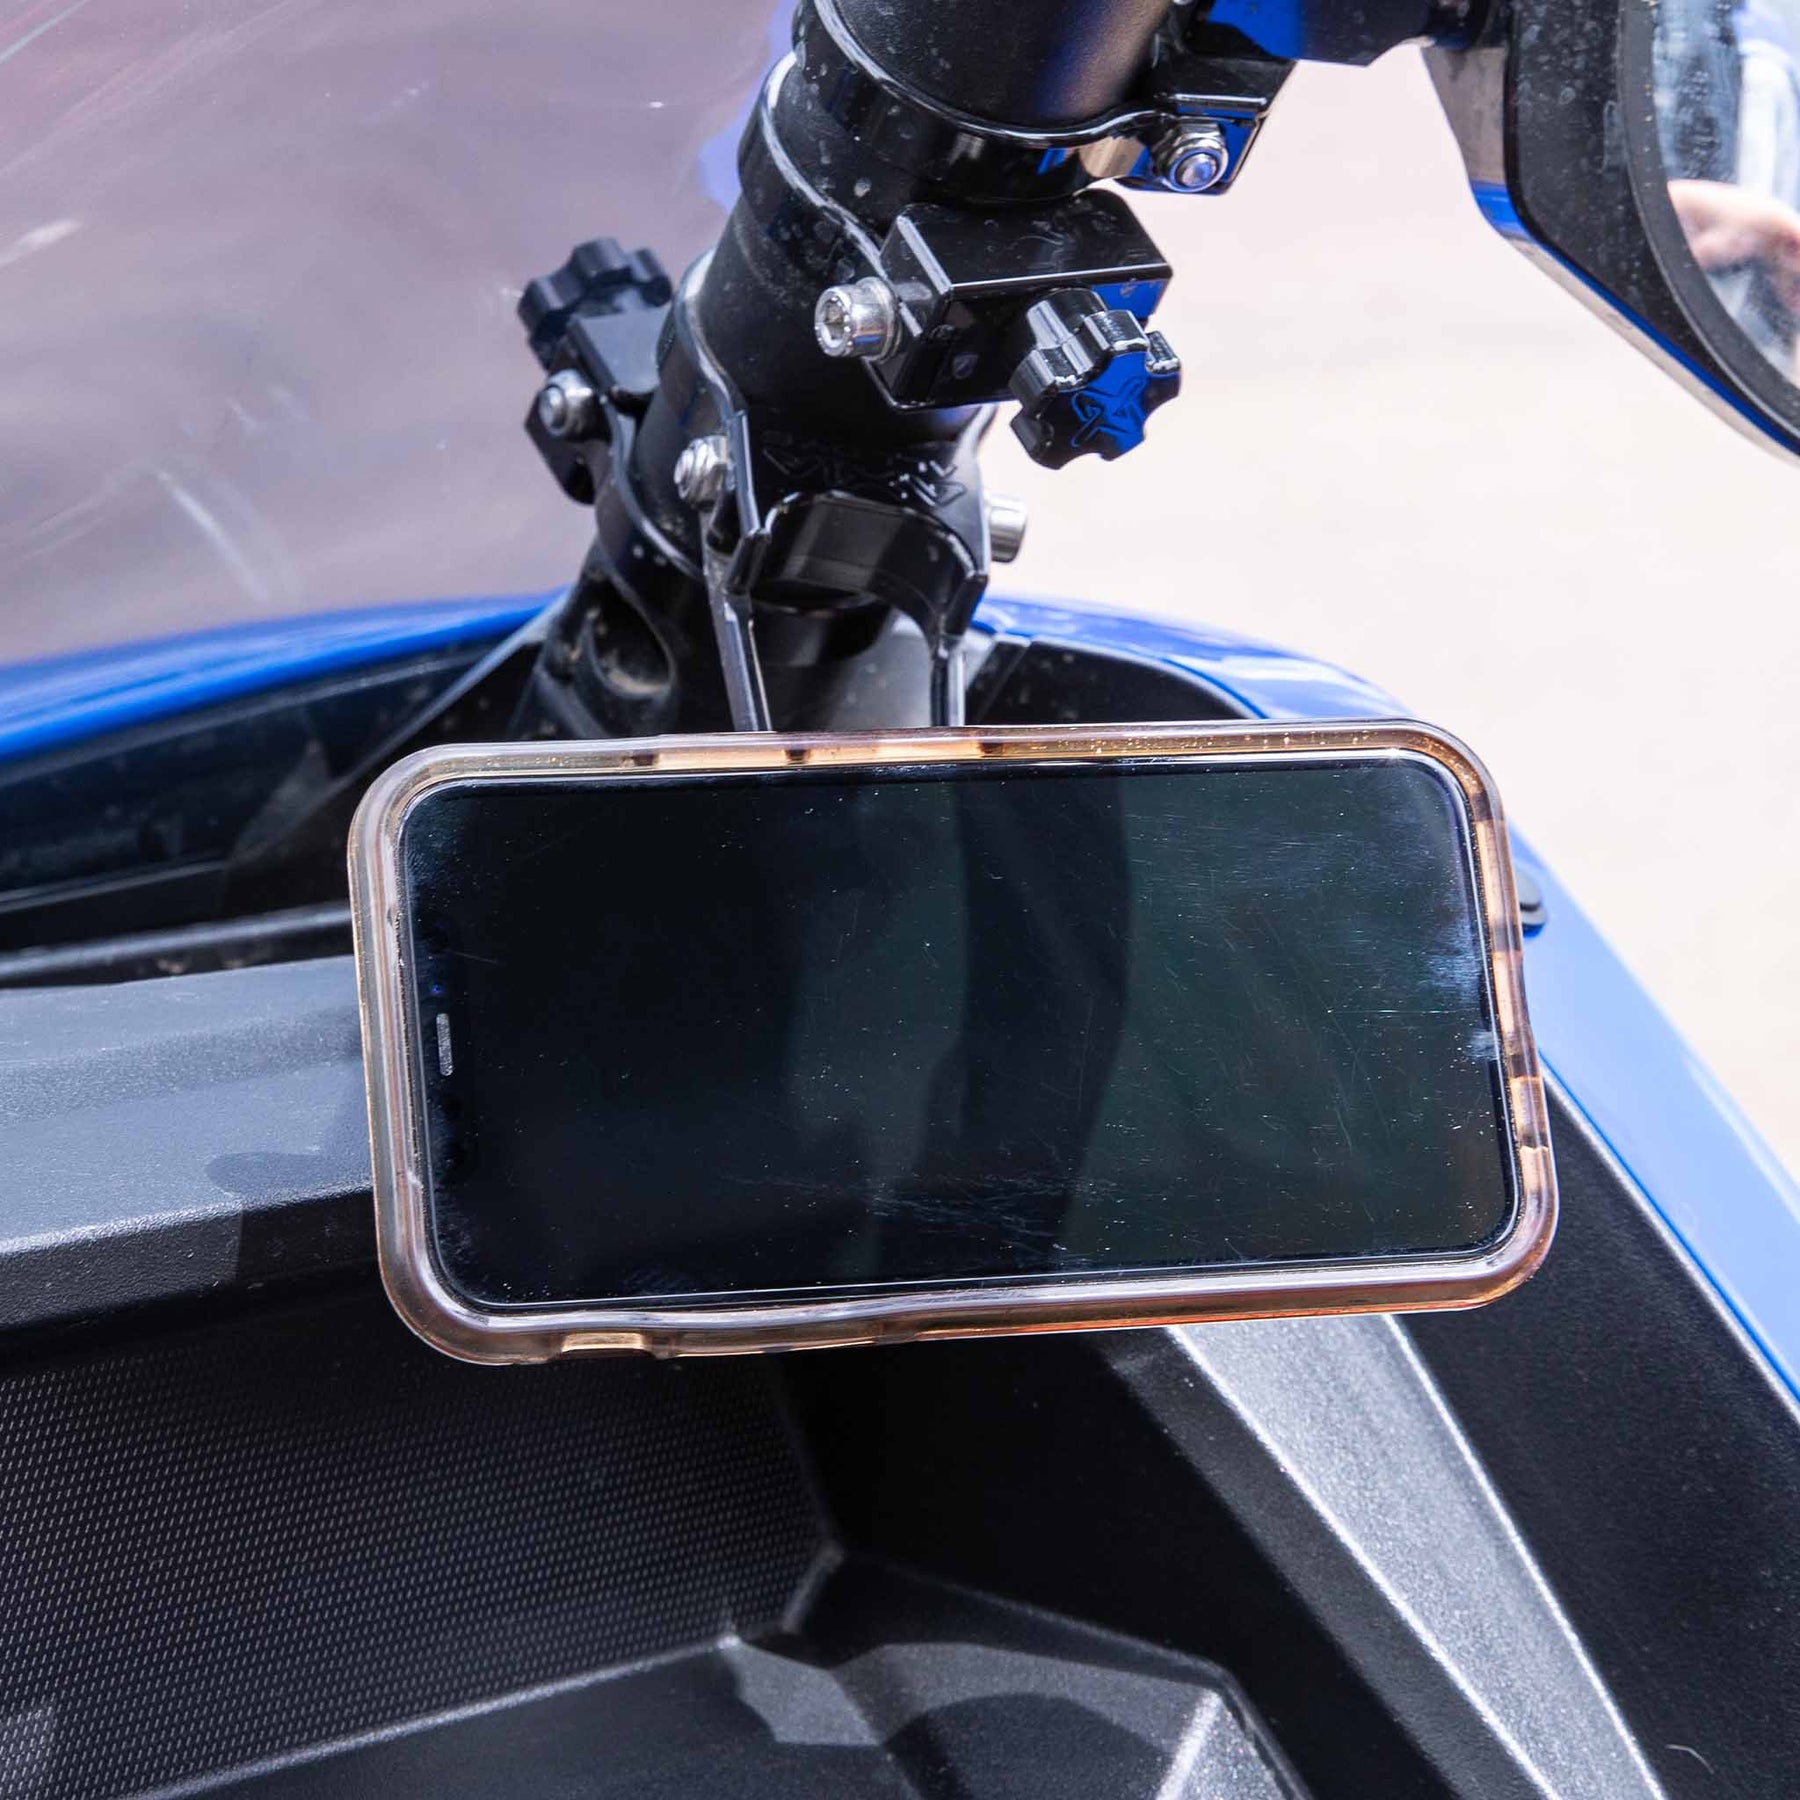 1.75" Offset Roll Cage Magnetic Phone Mount shown on Kawasaki KRX 1000 side by side